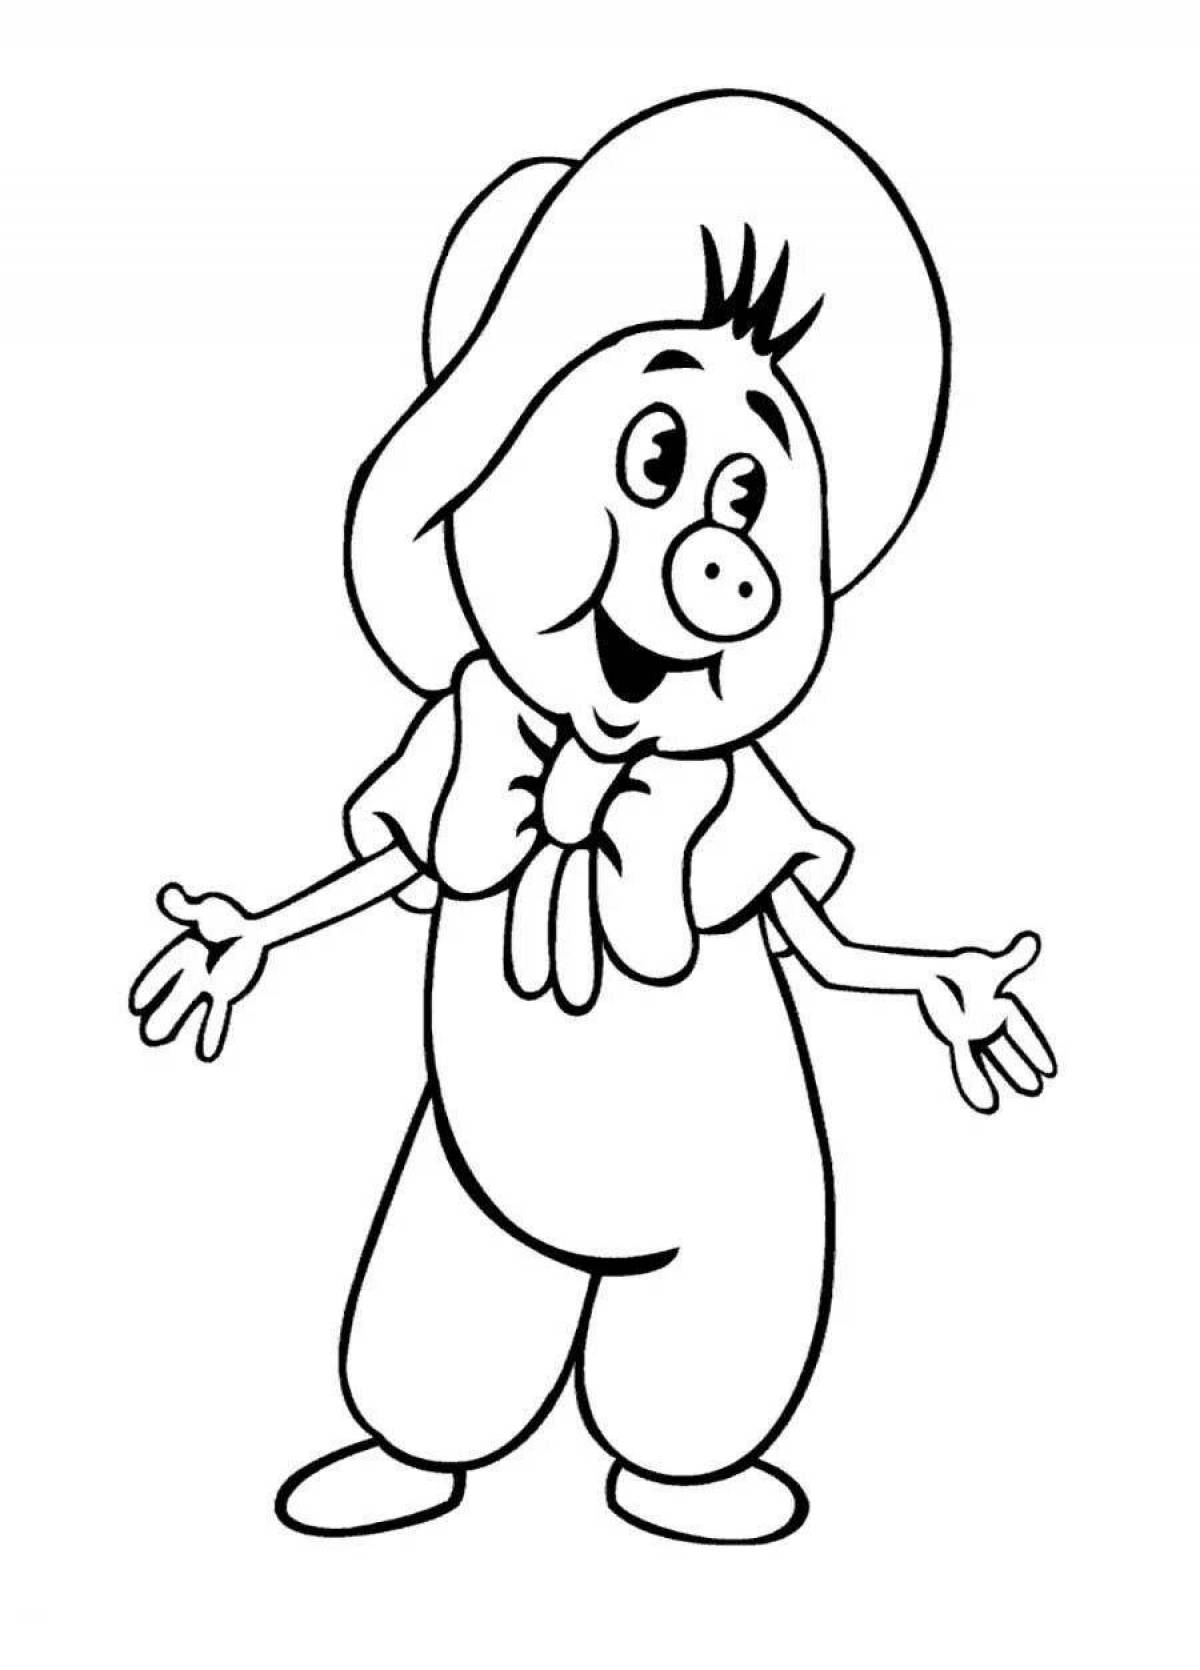 Awesome cartoon characters coloring page